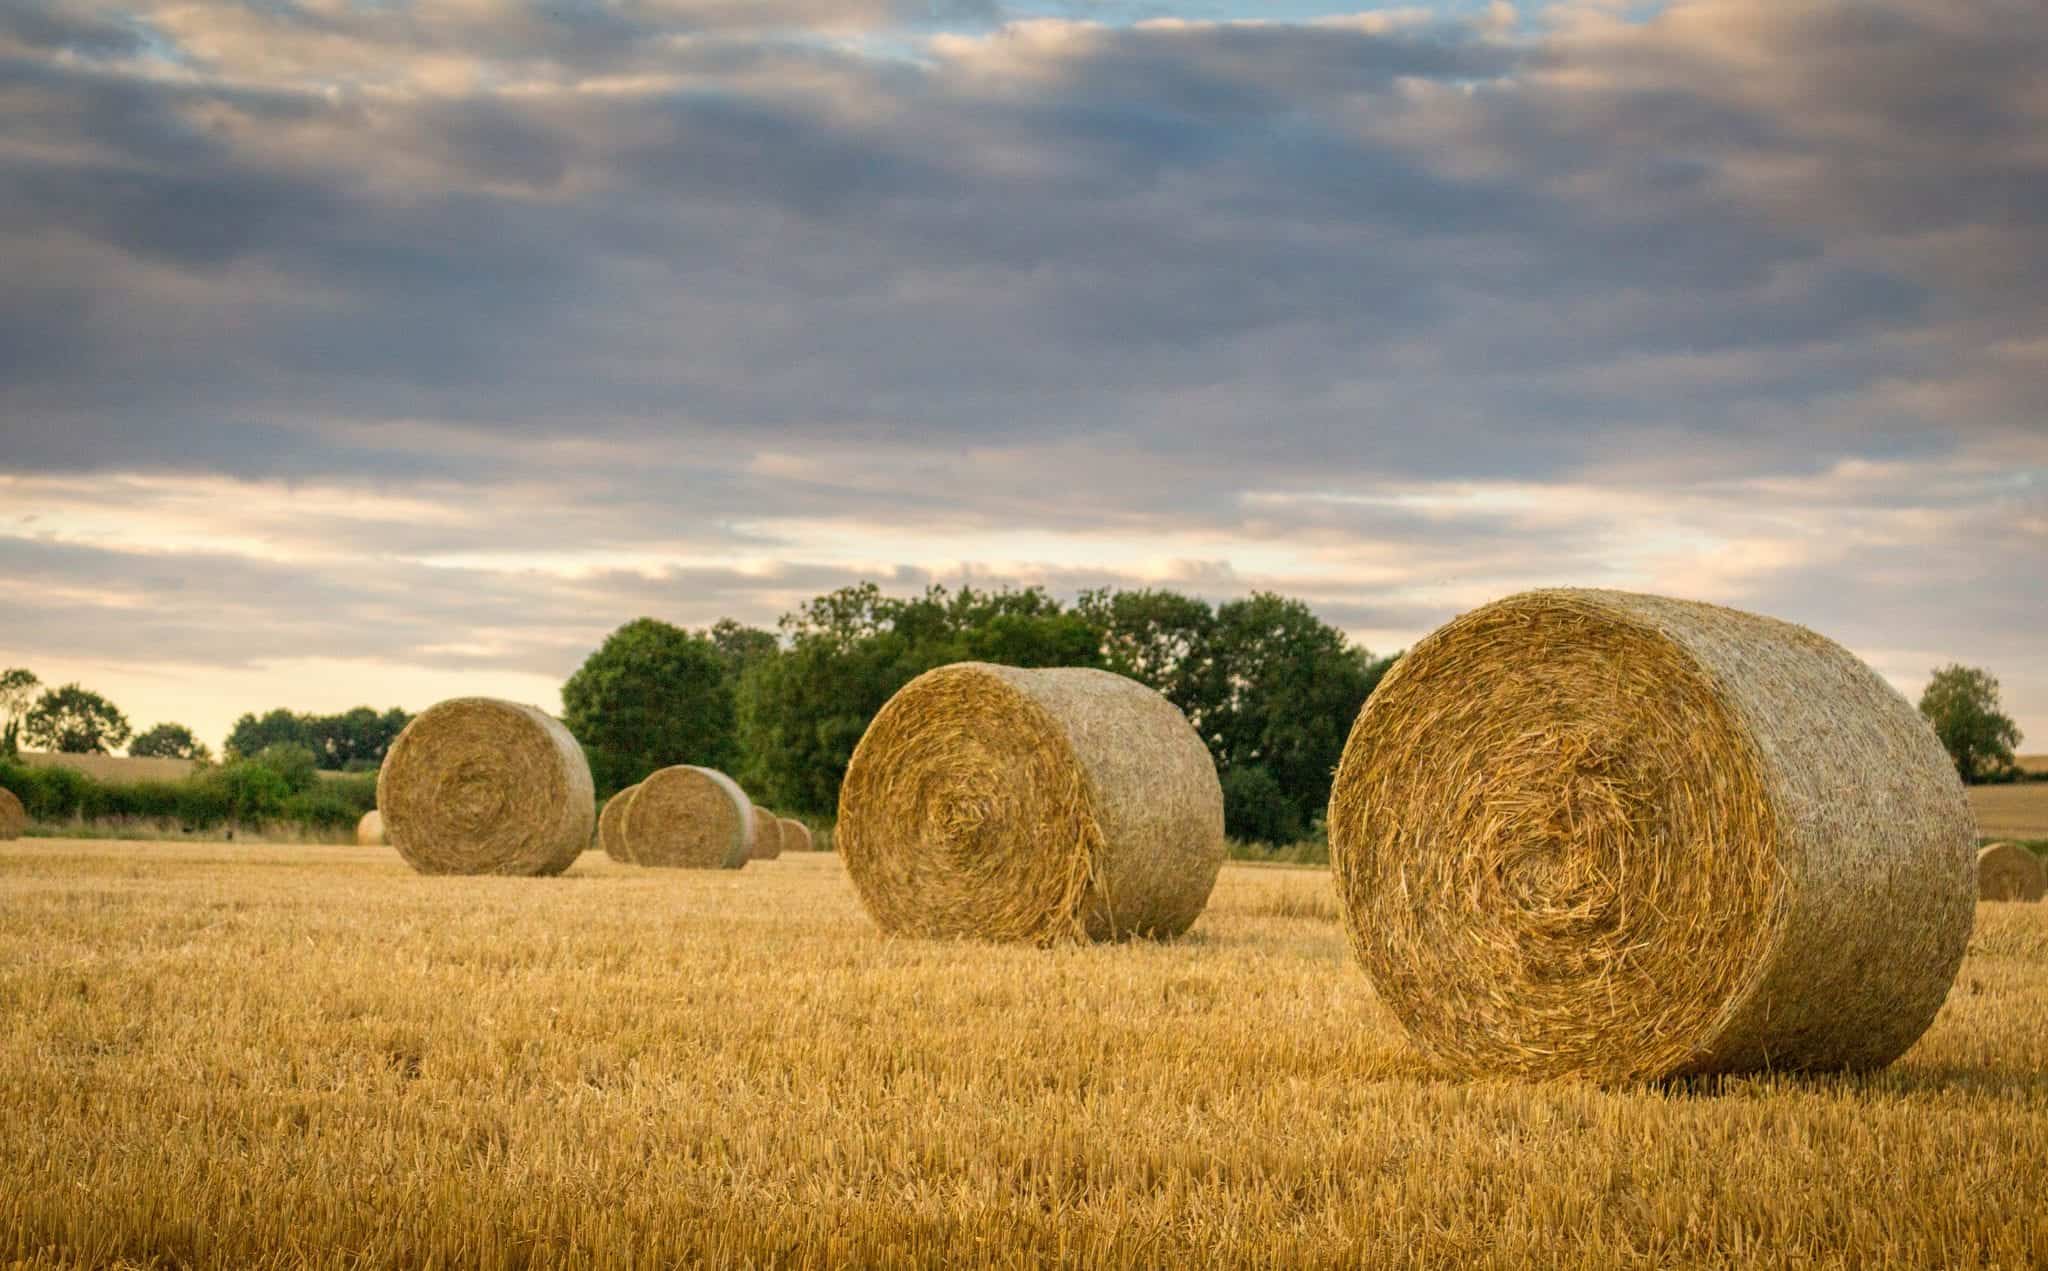 A landscape shot of hay bales on a harvested field with a row of green trees in the background under a stormy looking sky.